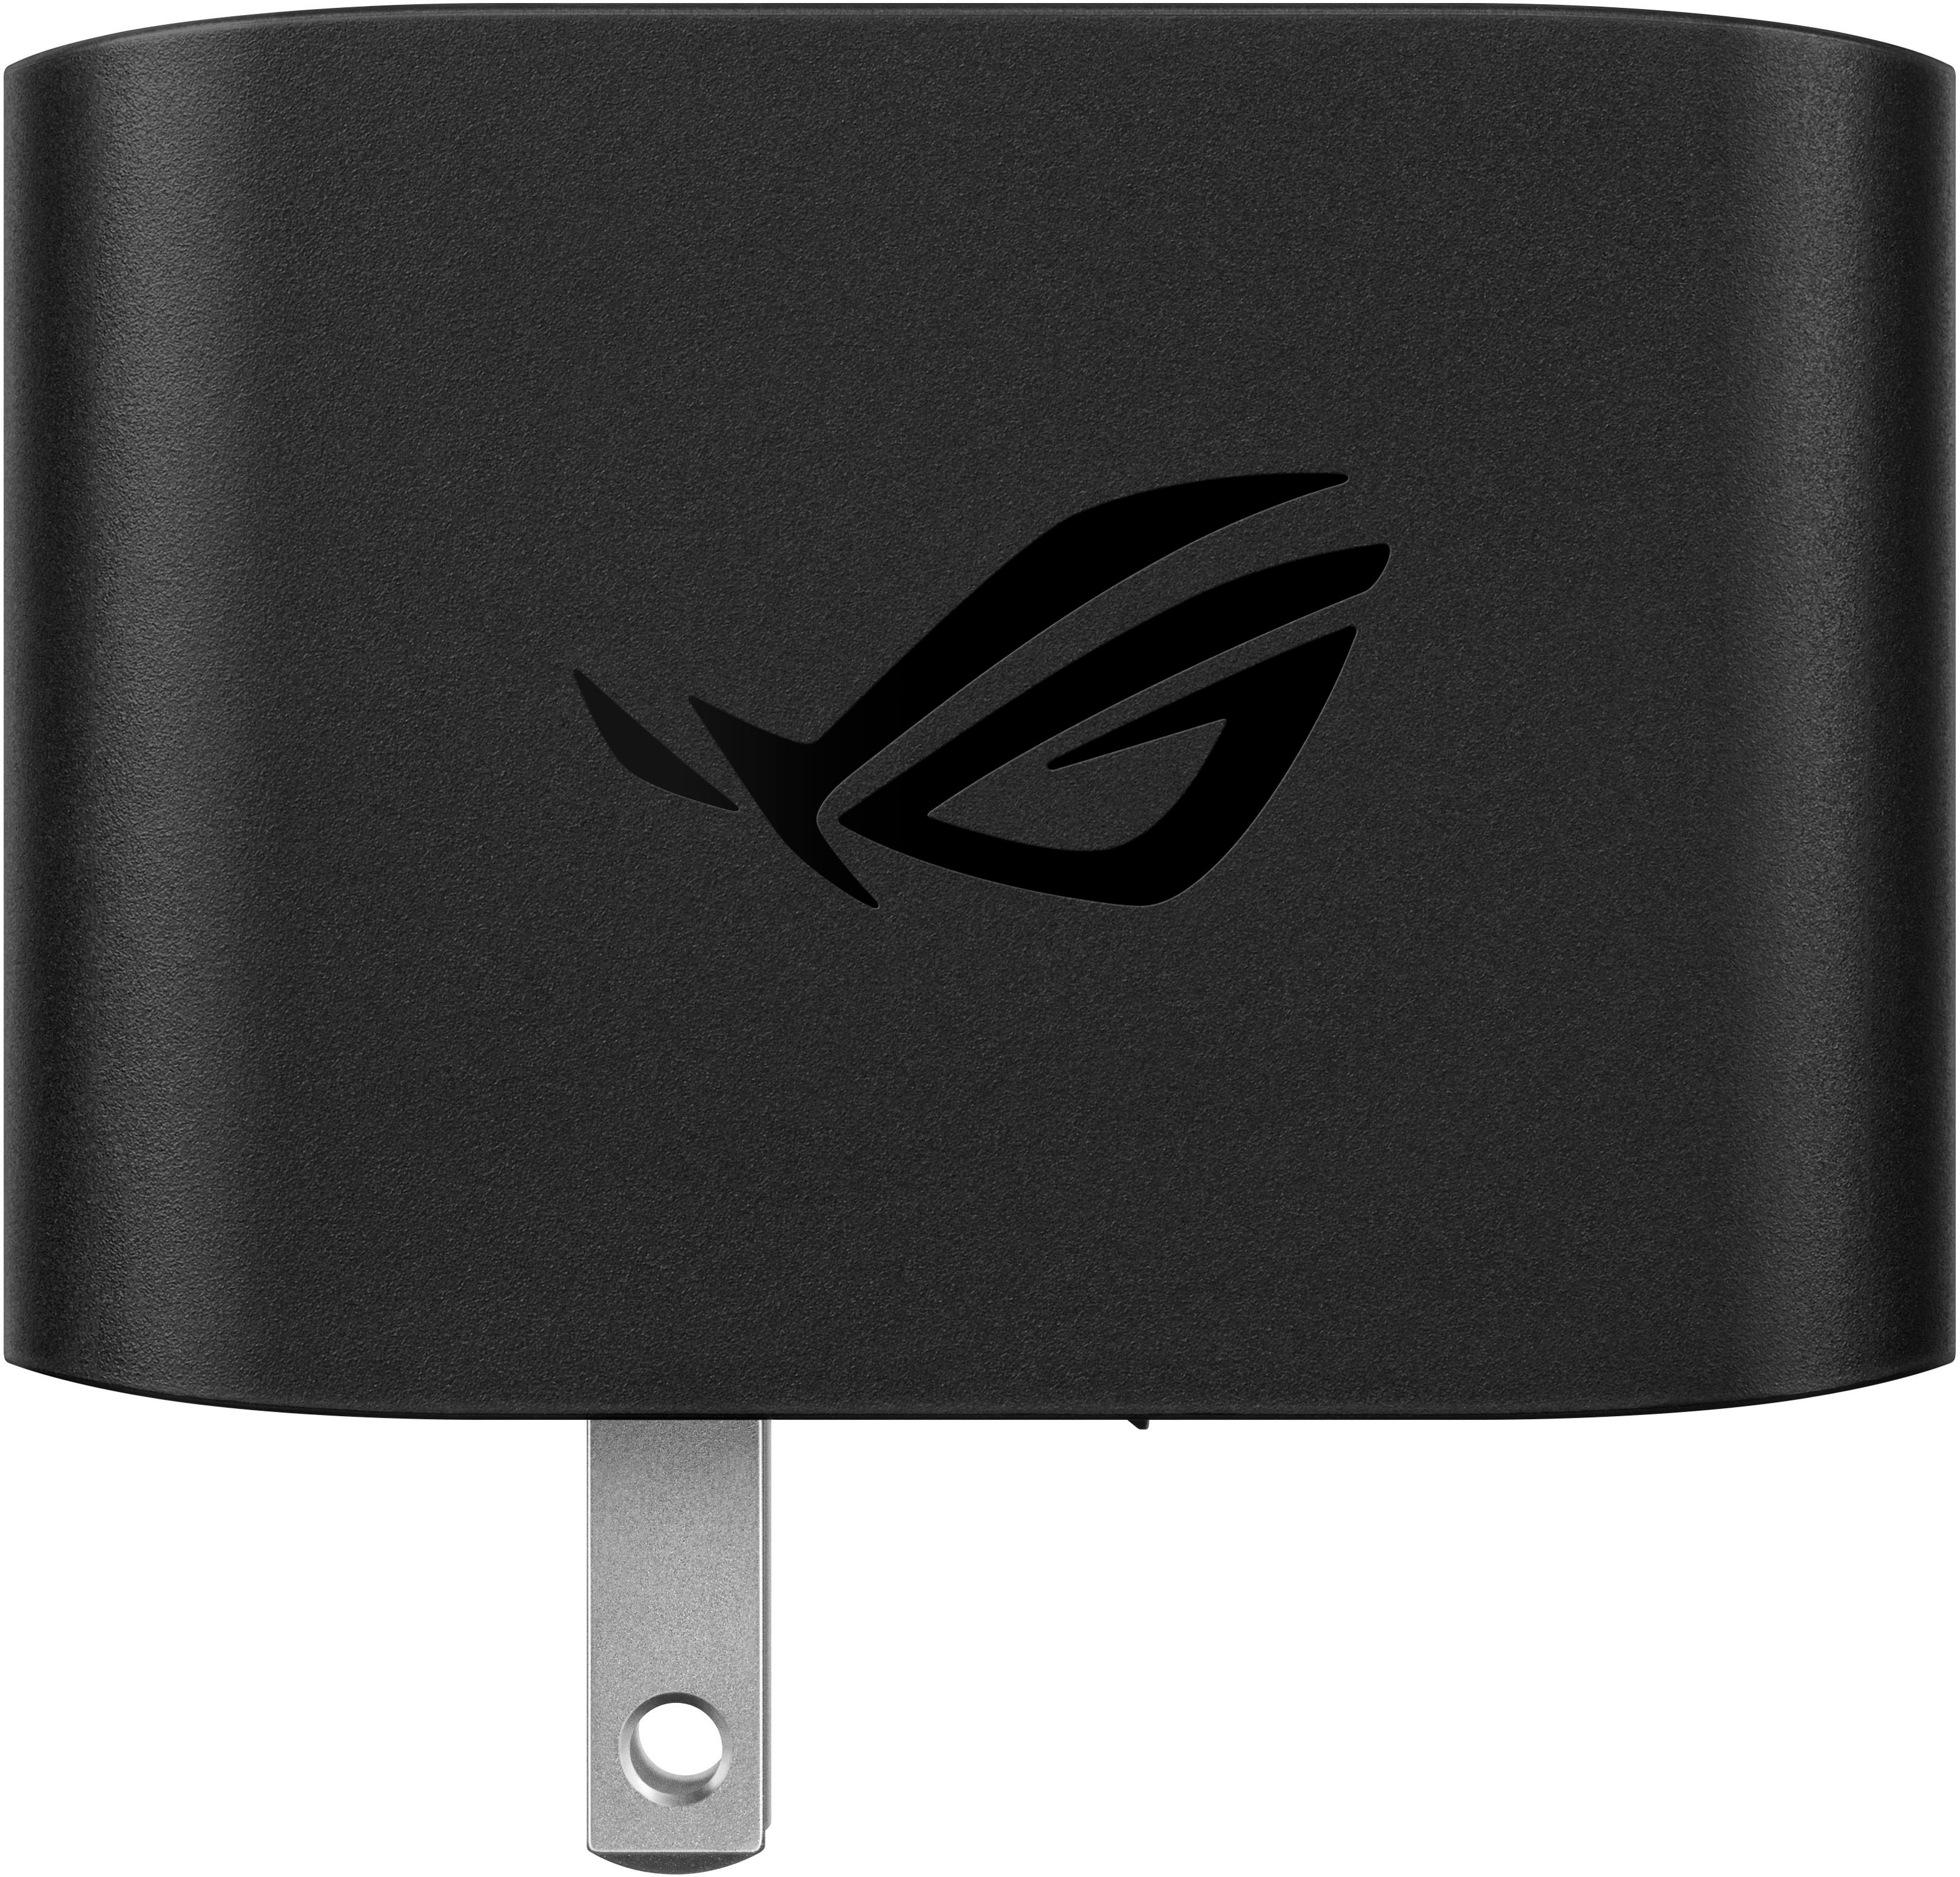 ASUS ROG 65W Charger Dock Supports HDMI 2.0 with USB Type-A and